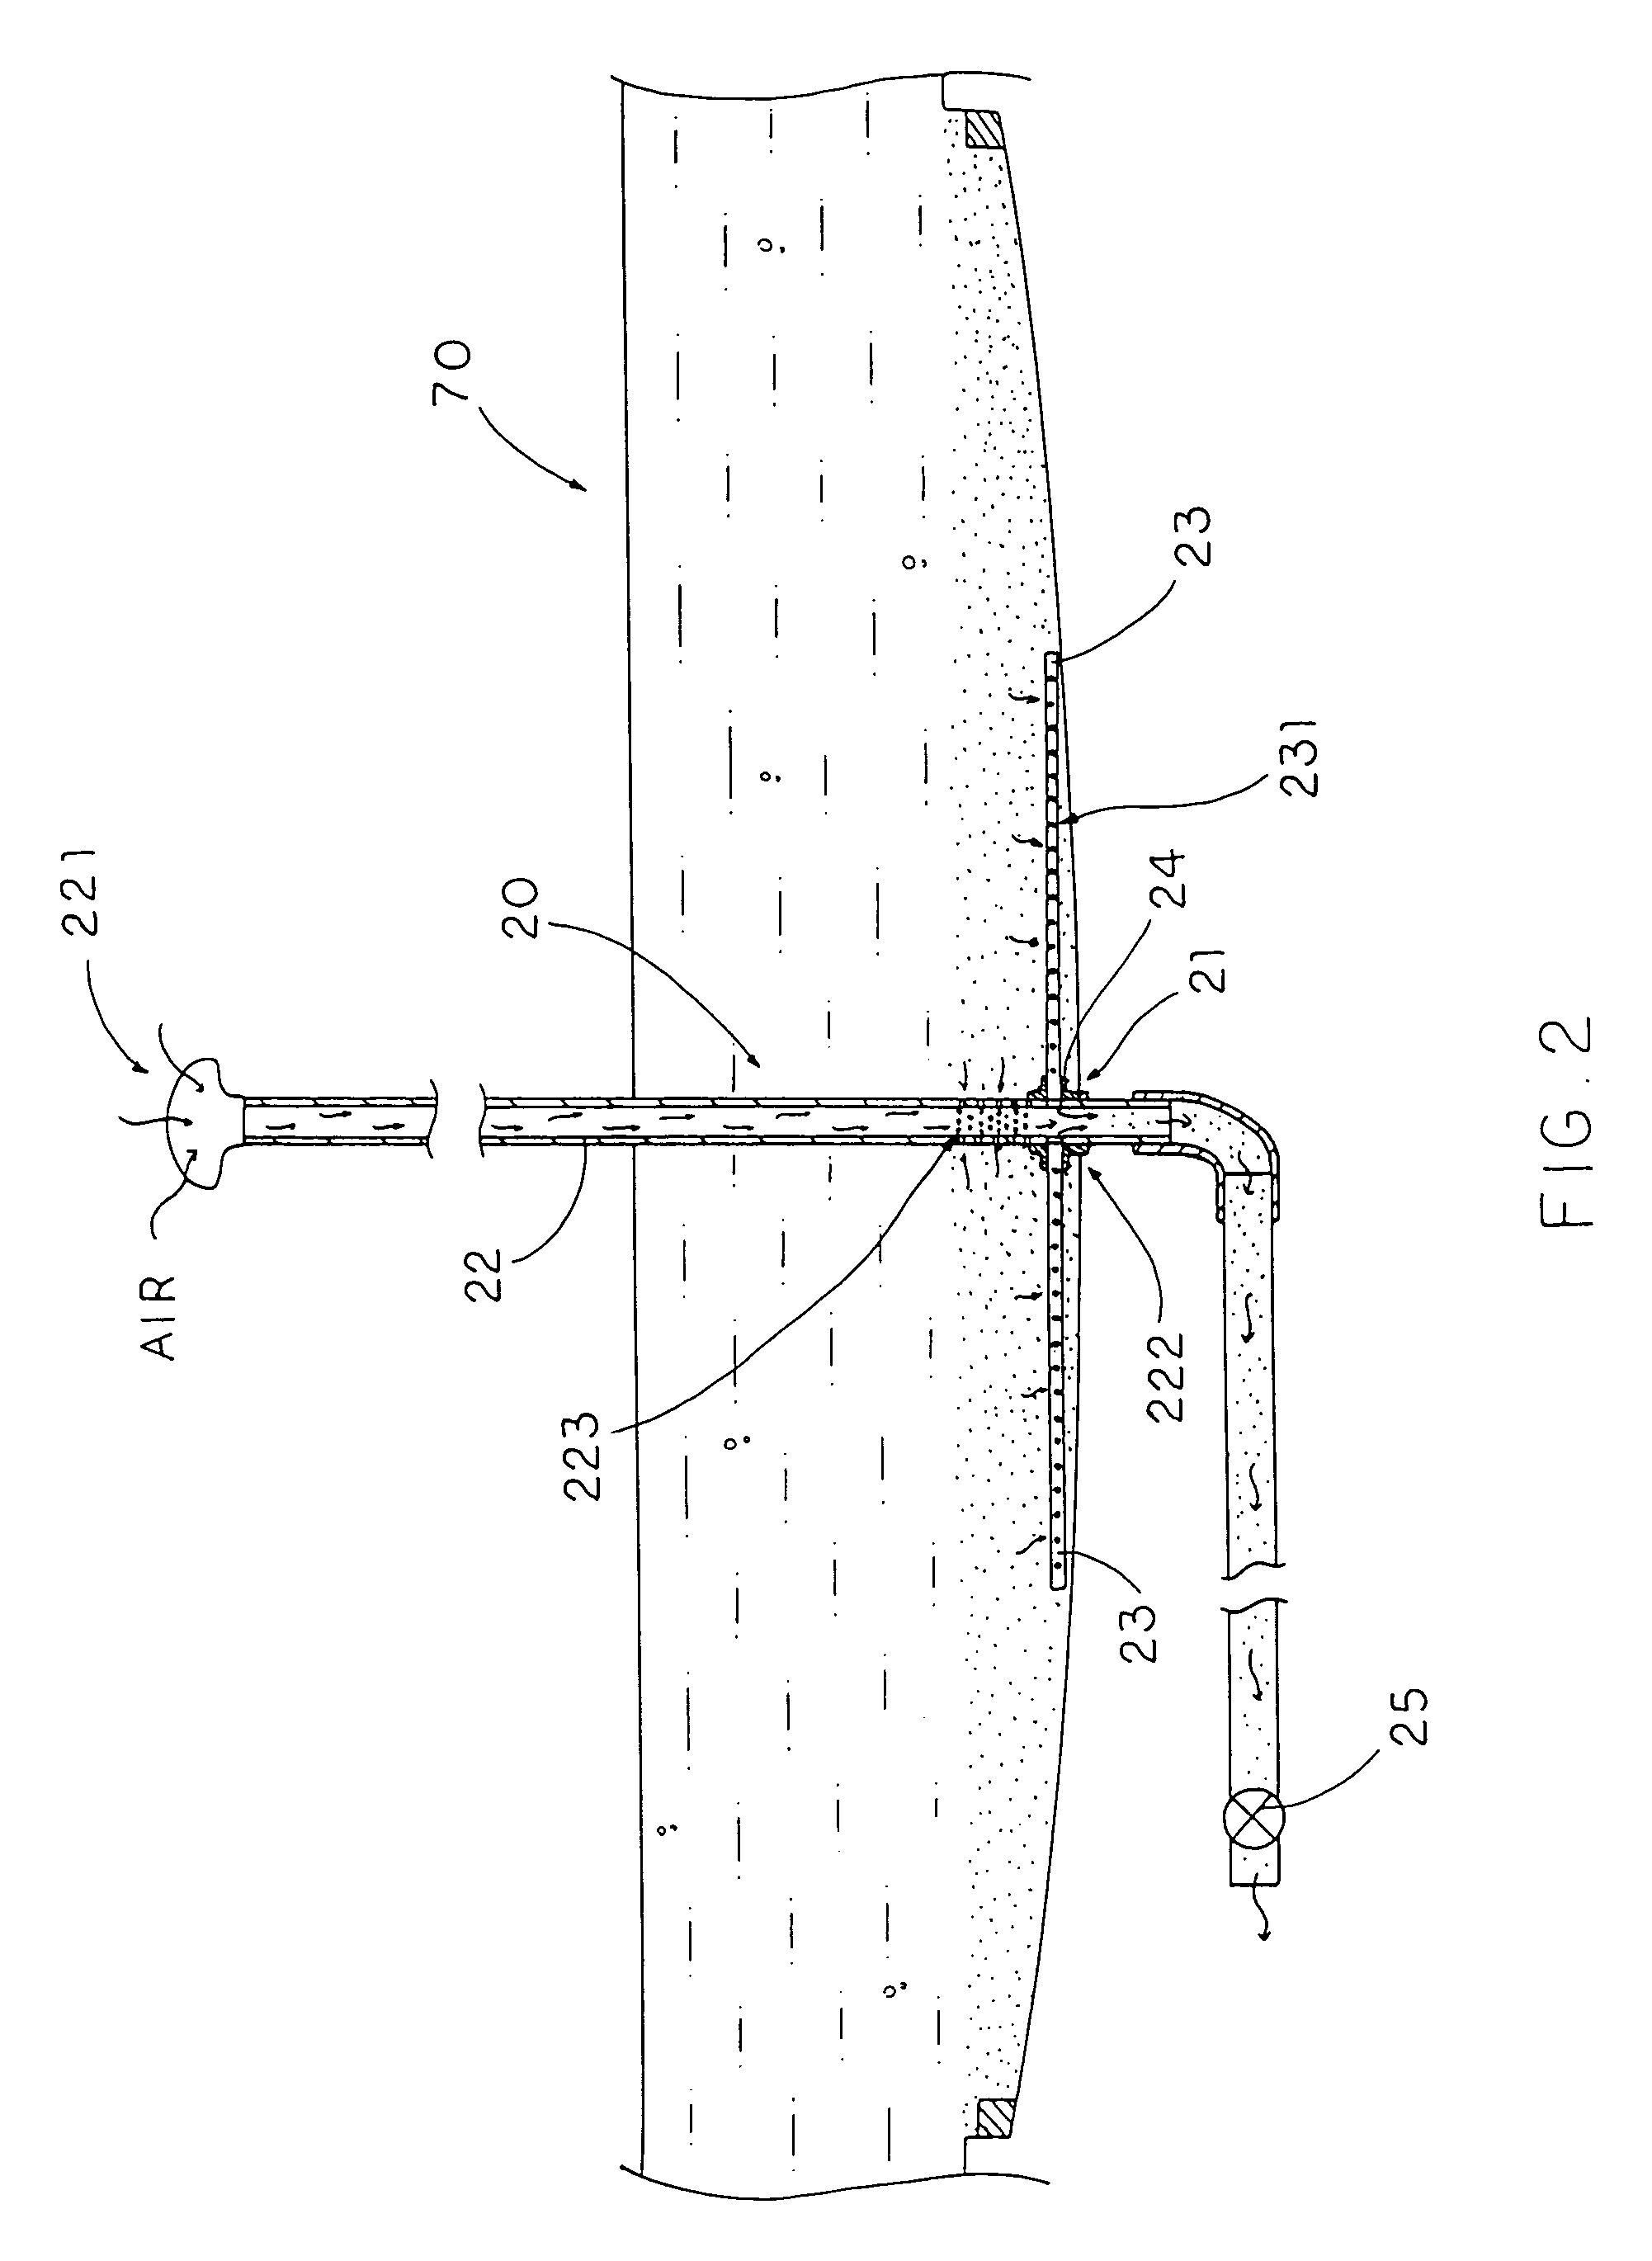 Water treatment system for water animal feeding facility